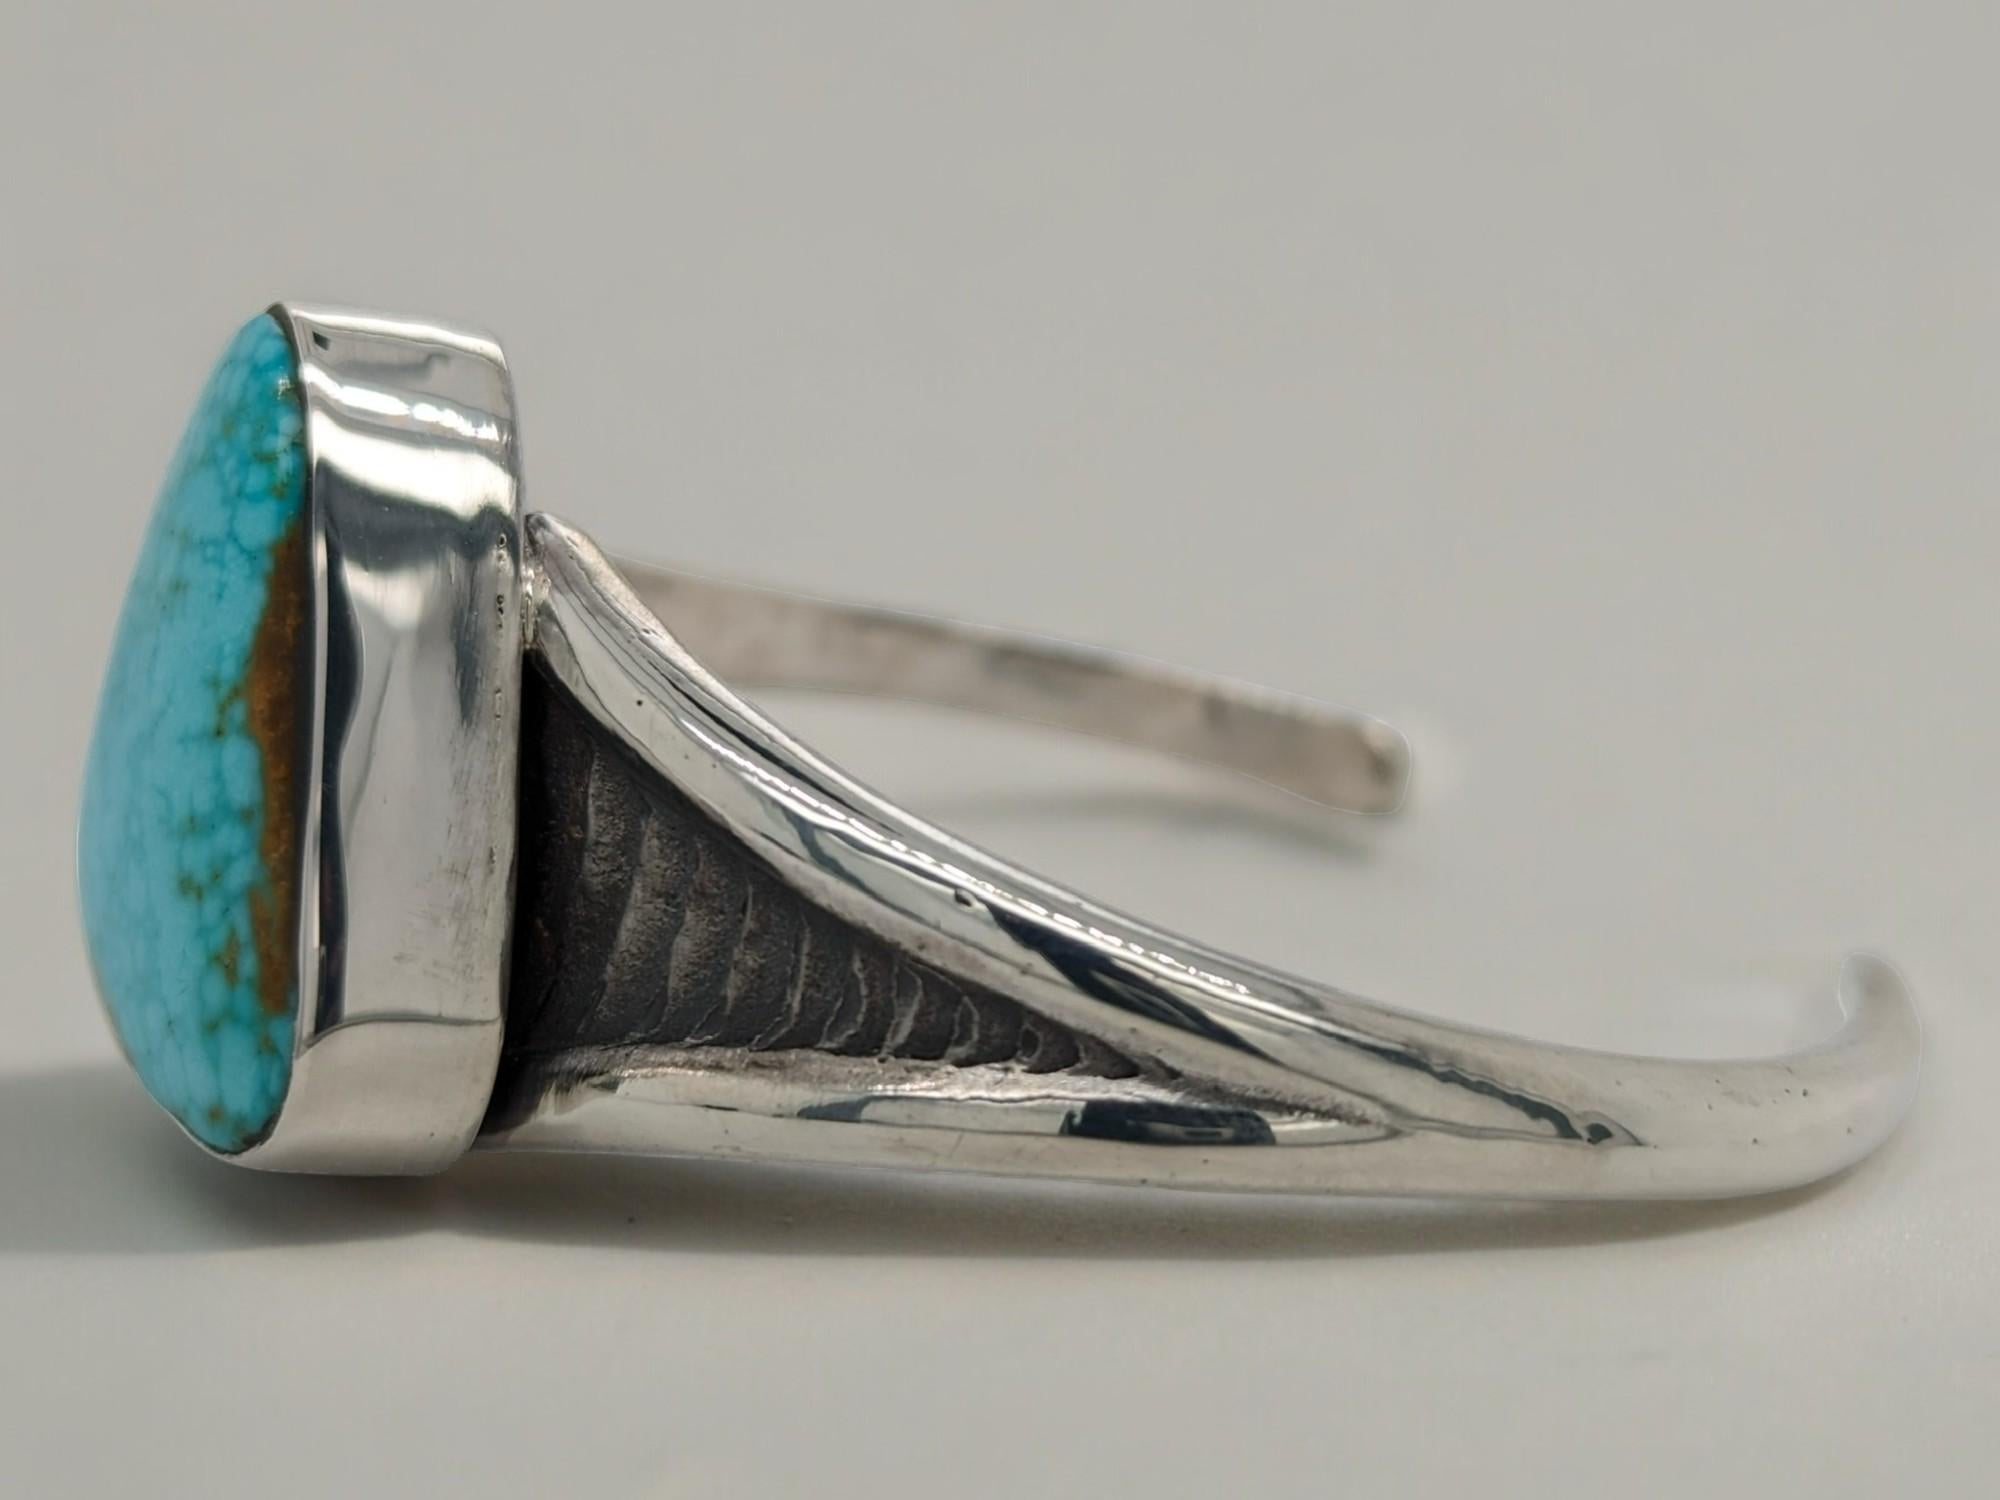 Striking Kingman Turquoise Cuff: Cuttle Bone Texture (Sterling Silver) For Sale 1